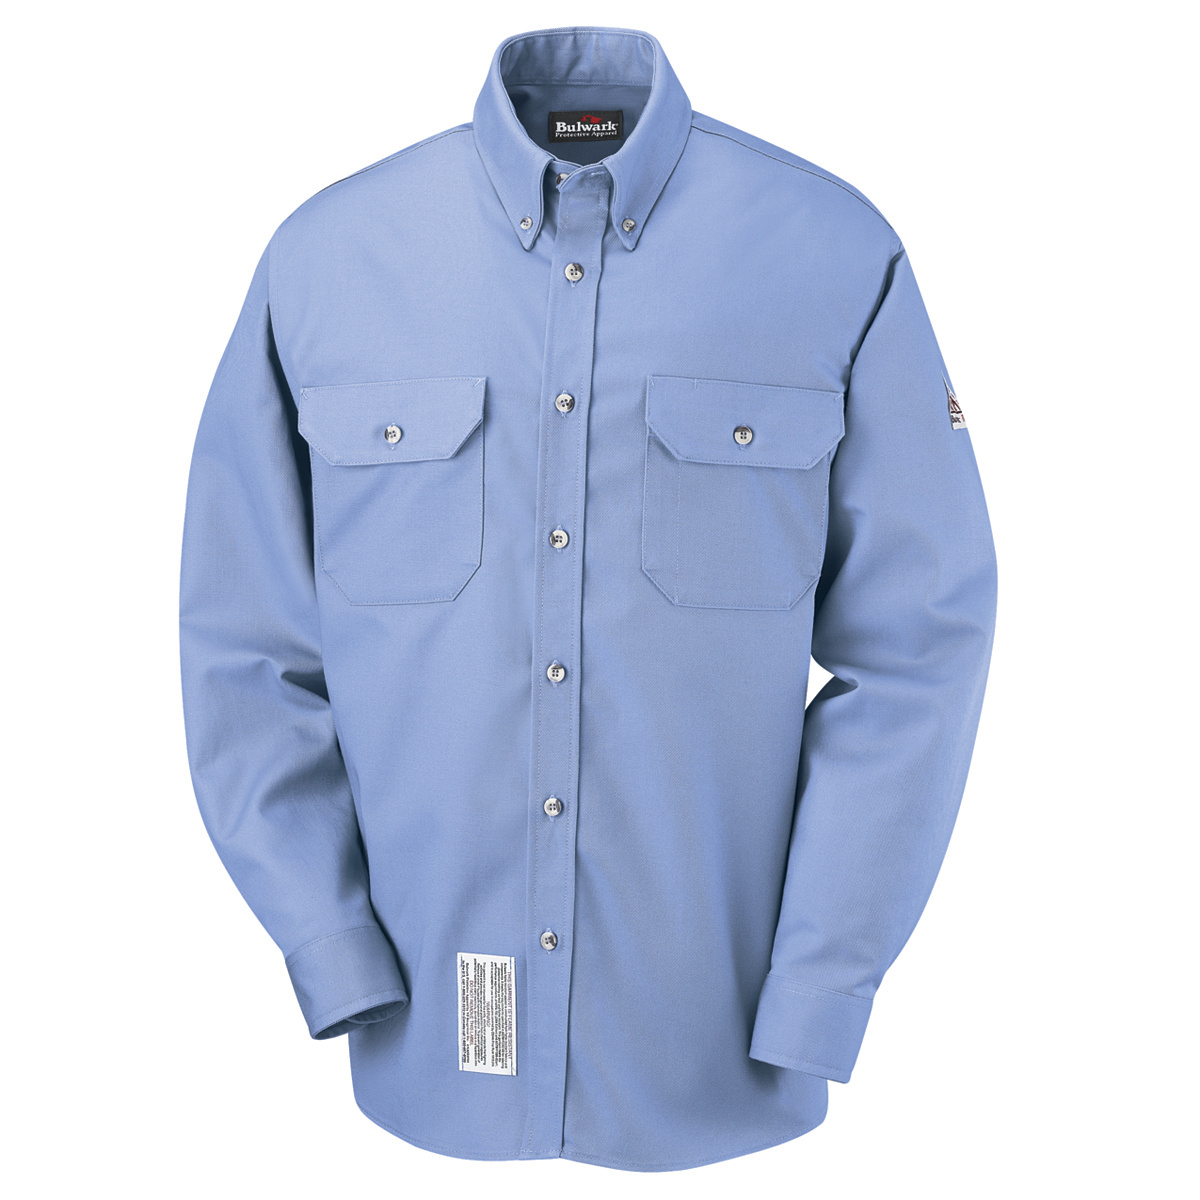 Bulwark® 2X Tall Light Blue Westex Ultrasoft®/Cotton/Nylon Flame Resistant Dress Shirt With Button Front Closure